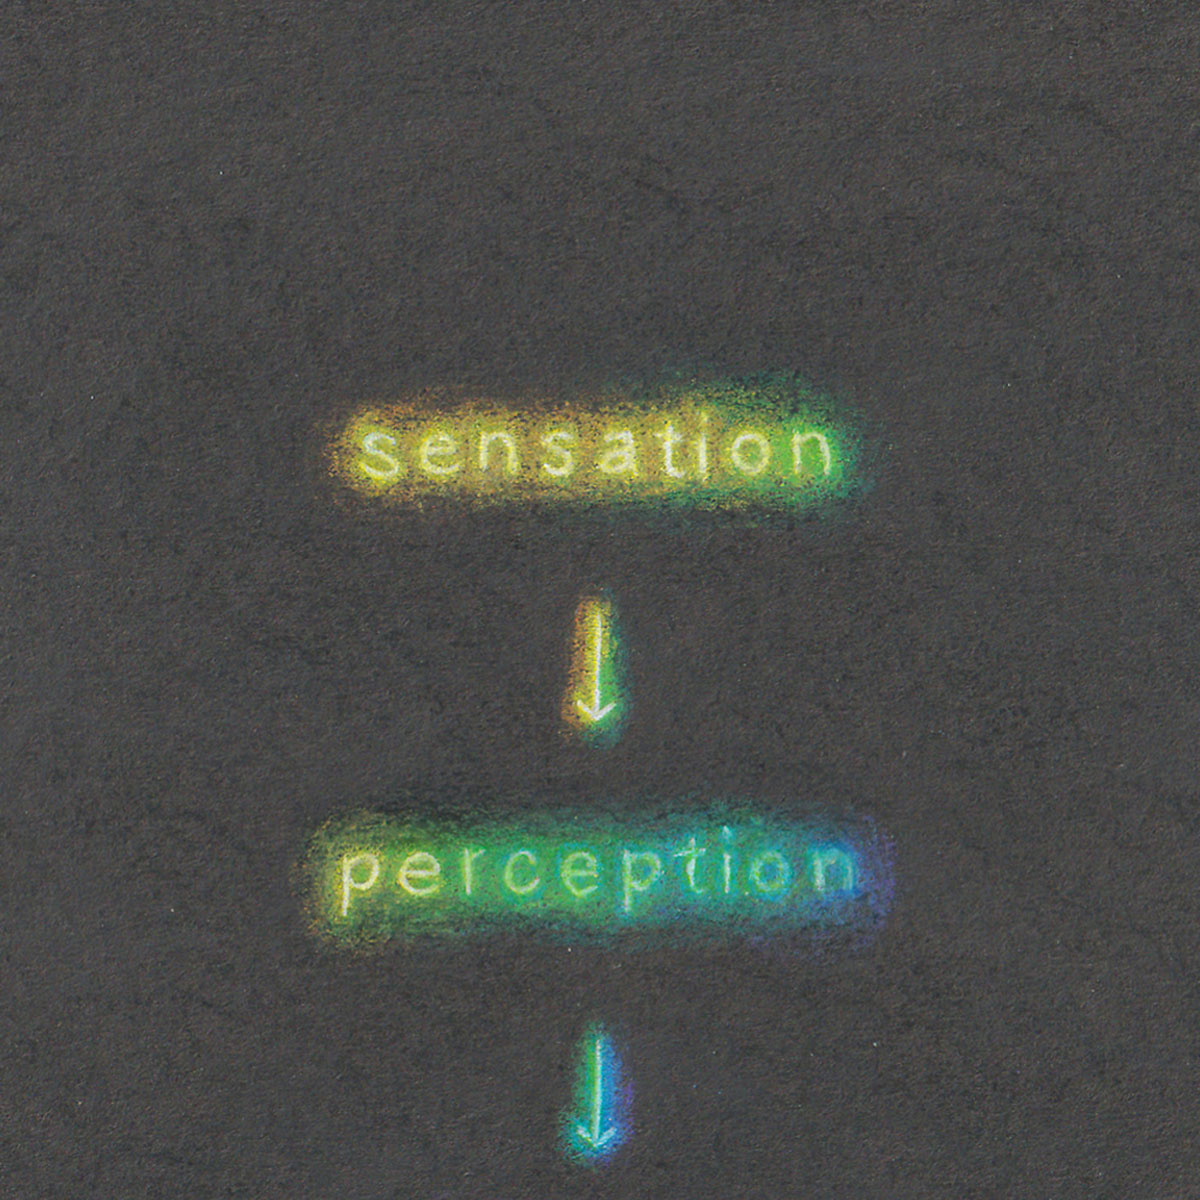 Rainbow text of yellow, green, and blue against a black background